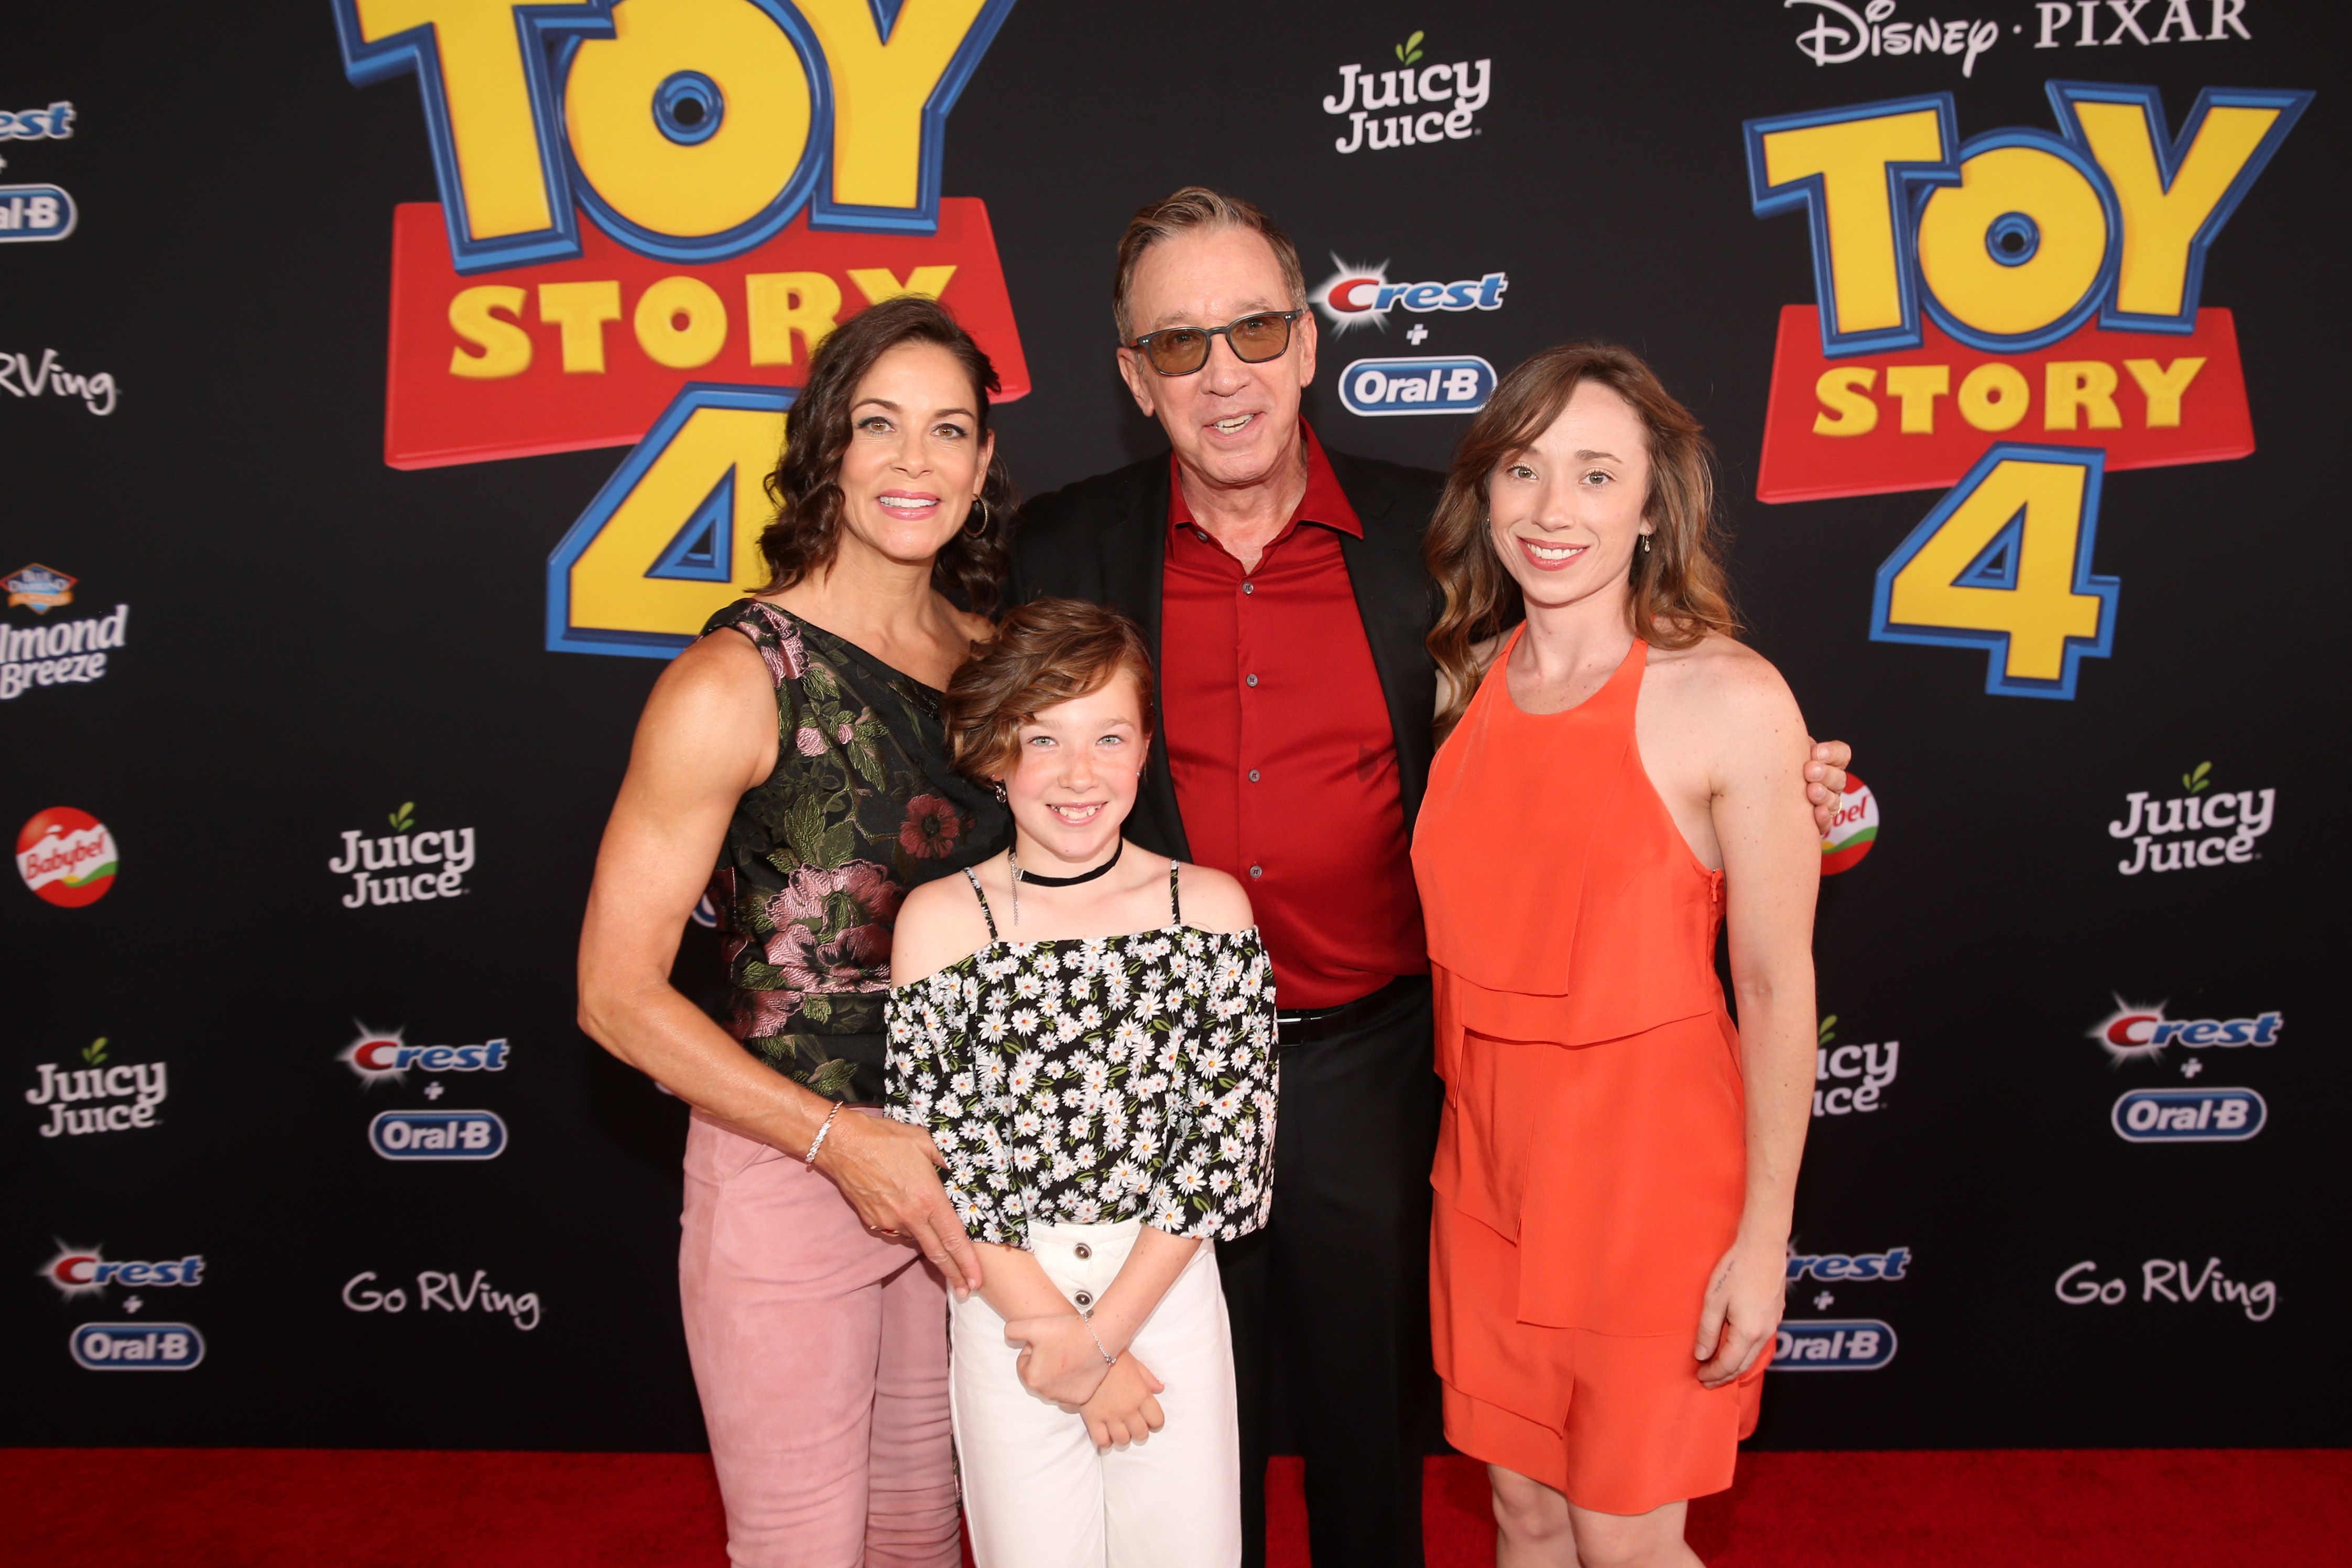 Jane Hajduk, Tim Allen, and their kids during the world premiere of Disney and Pixar's TOY STORY 4 at the El Capitan Theatre in Hollywood, CA on Tuesday, June 11, 2019. | Source: Getty Images